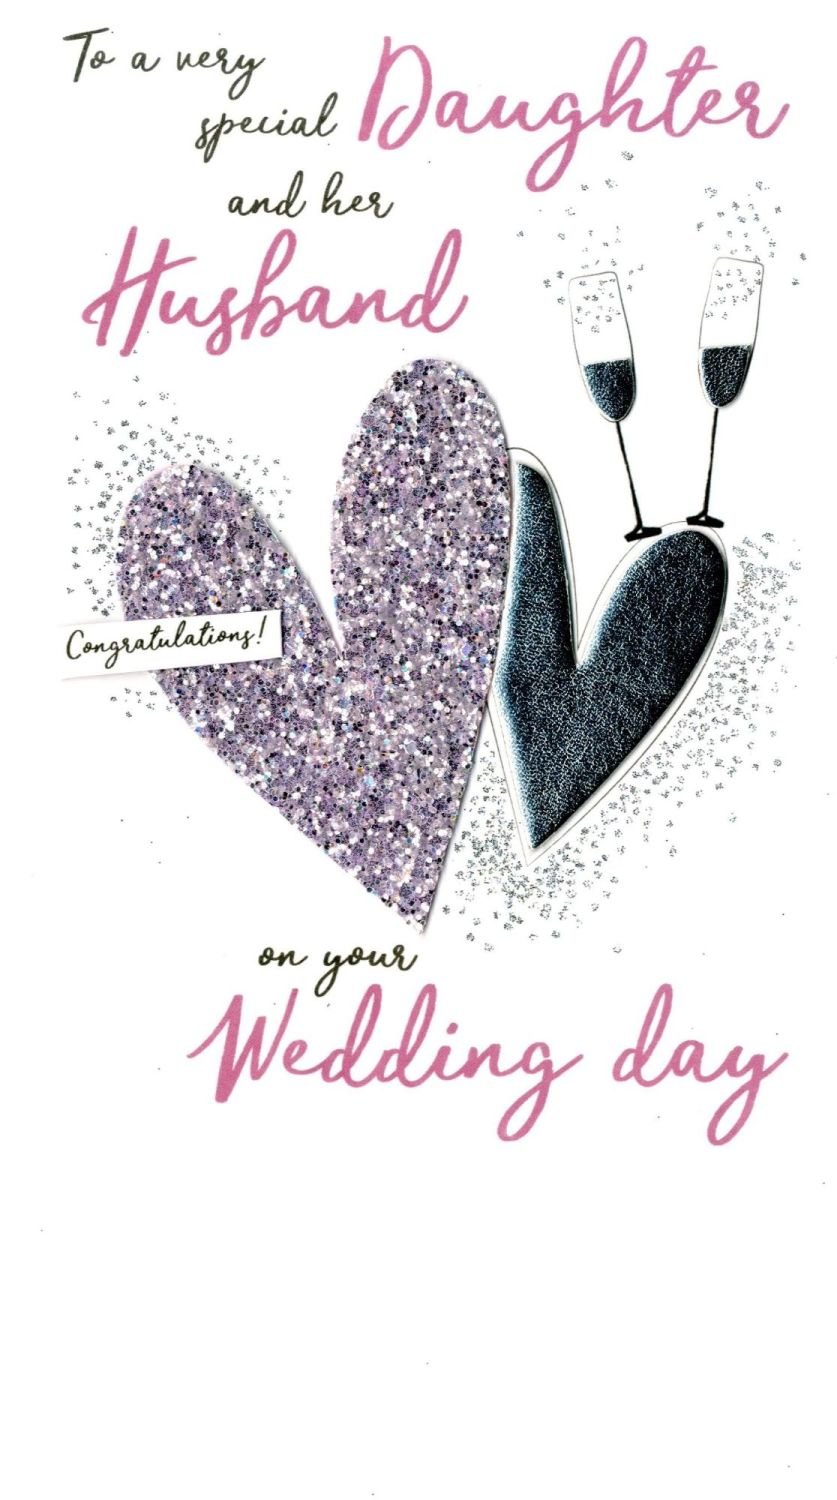 To A Very Special Daughter And Her Husband On Your Wedding Day - Card